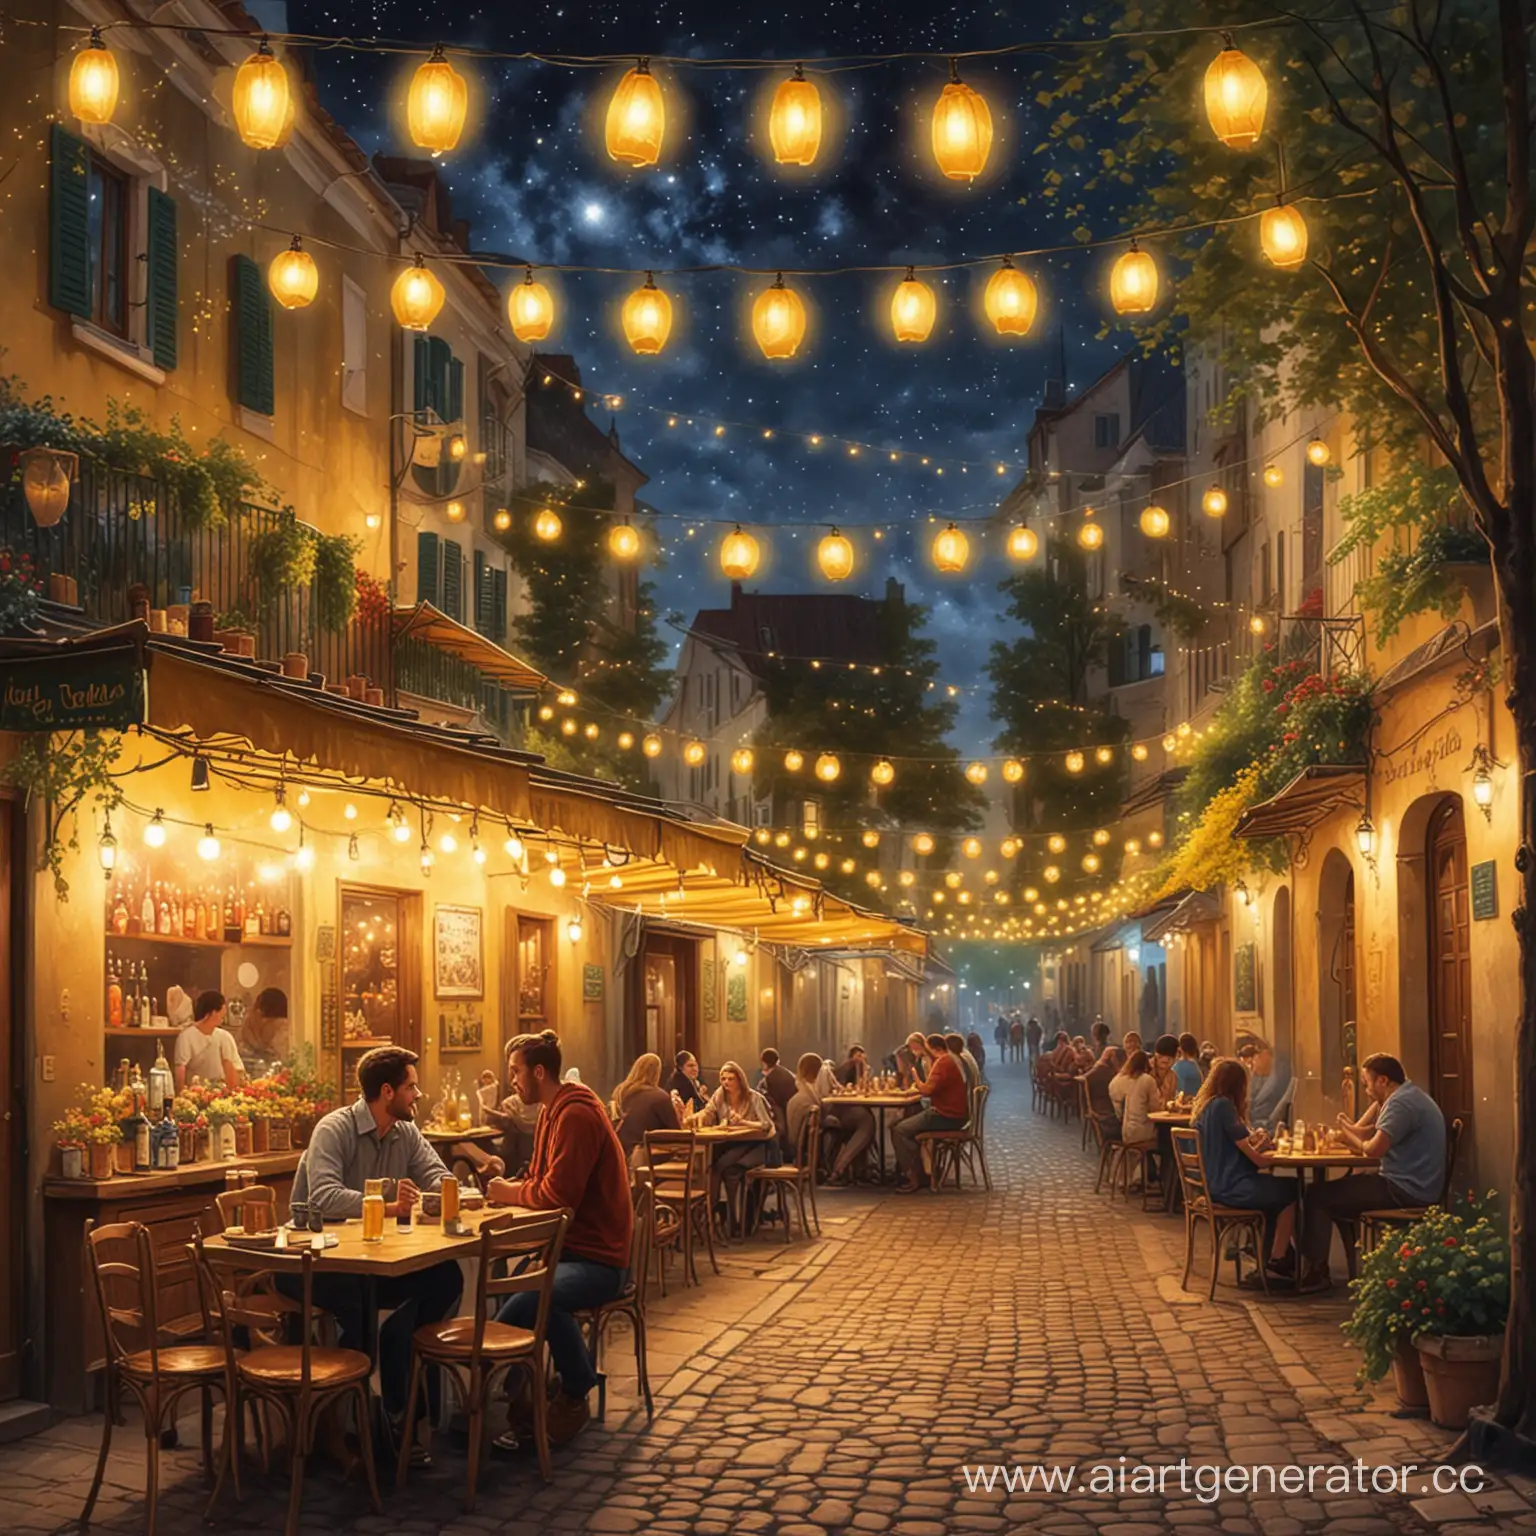 Nighttime-Street-Cafe-with-Festive-Atmosphere-and-Park-Views